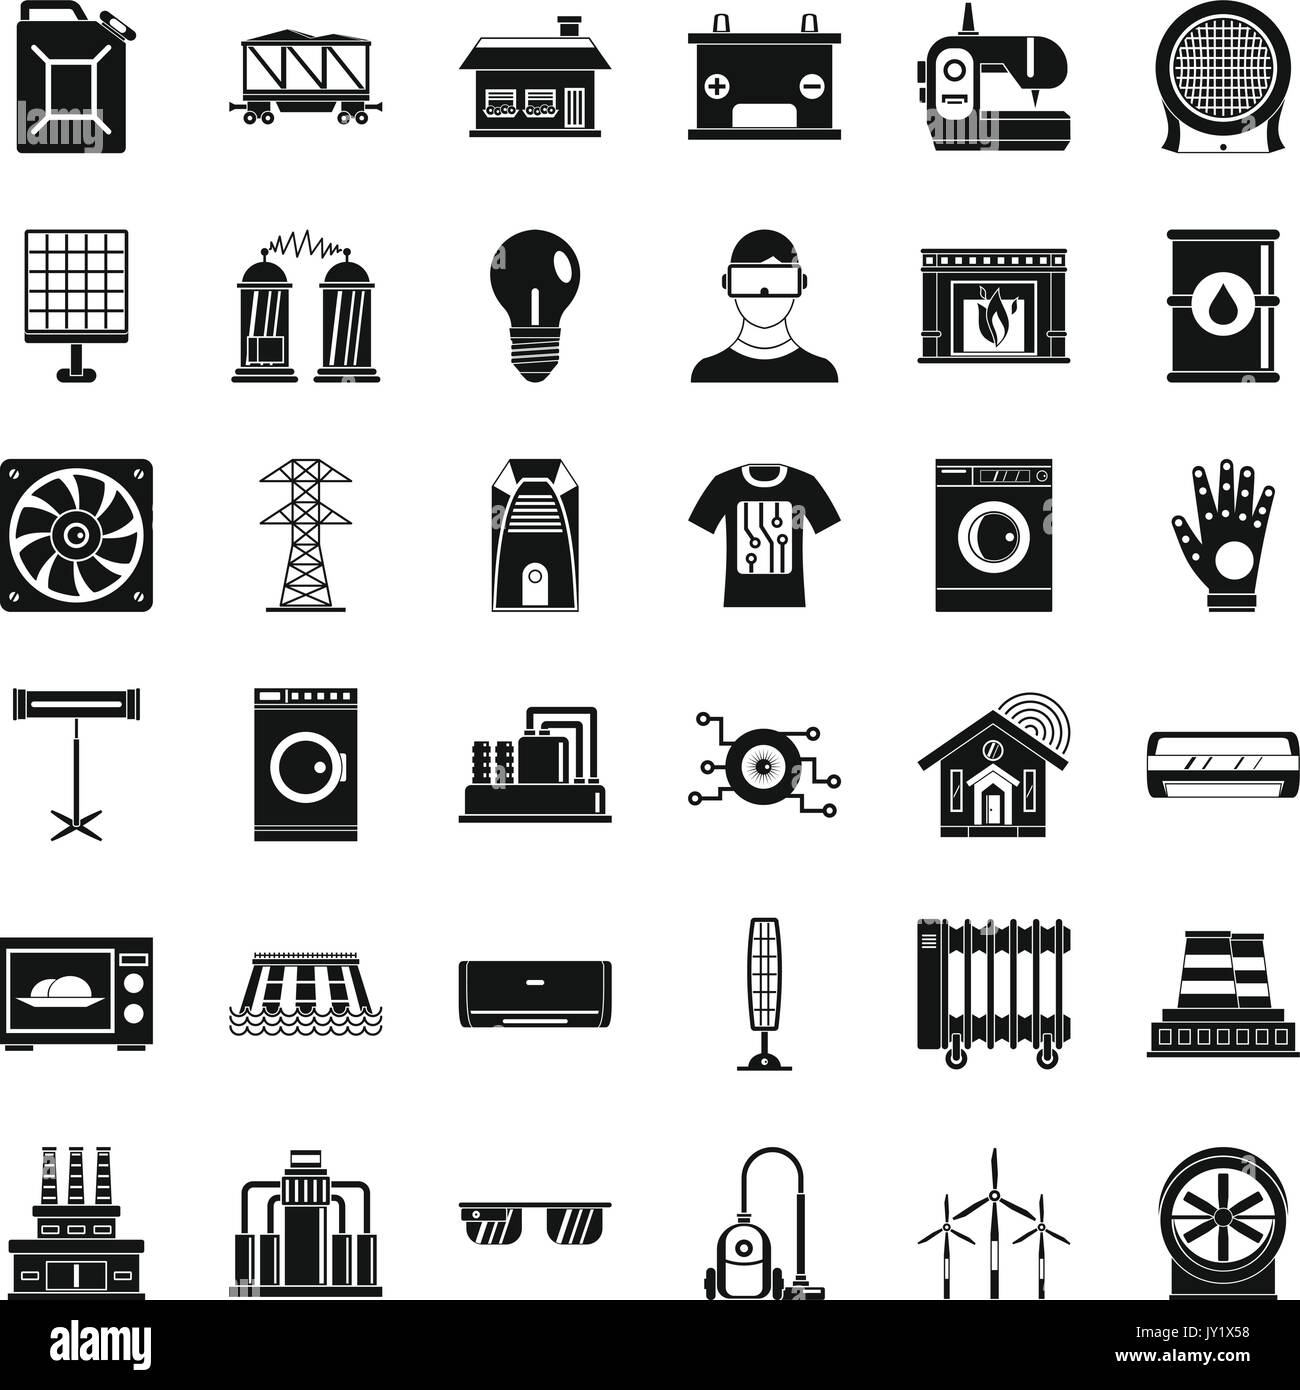 Electricity icons set, simple style Stock Vector